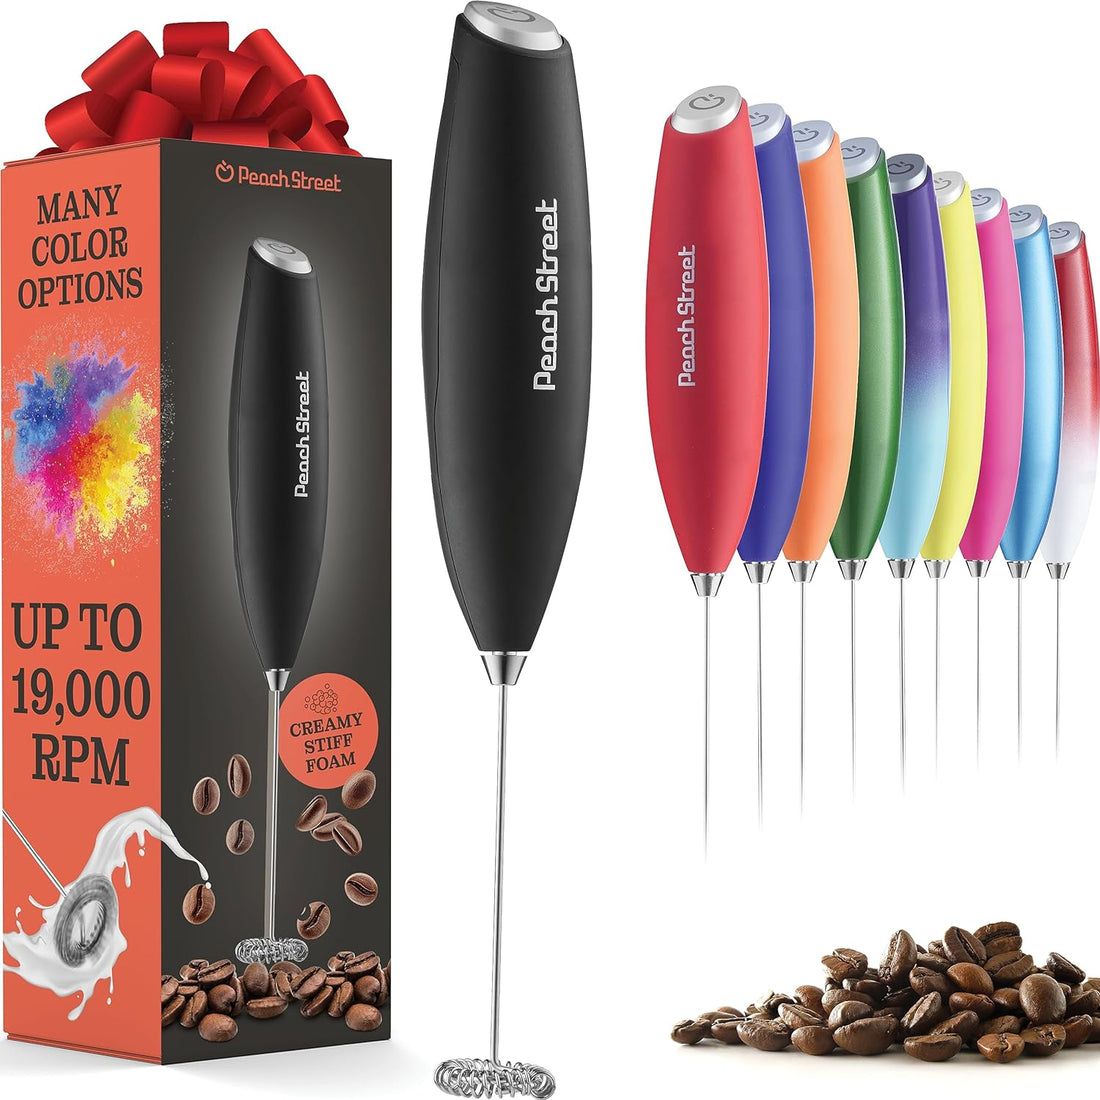 Powerful Handheld Milk Frother, Mini Milk Foamer Stainless Steel Drink Mixer with Frother Stand for Coffee, Lattes, Cappuccino, Frappe, Matcha, Hot Chocolate. (Coffee Beater) (Beater 1)